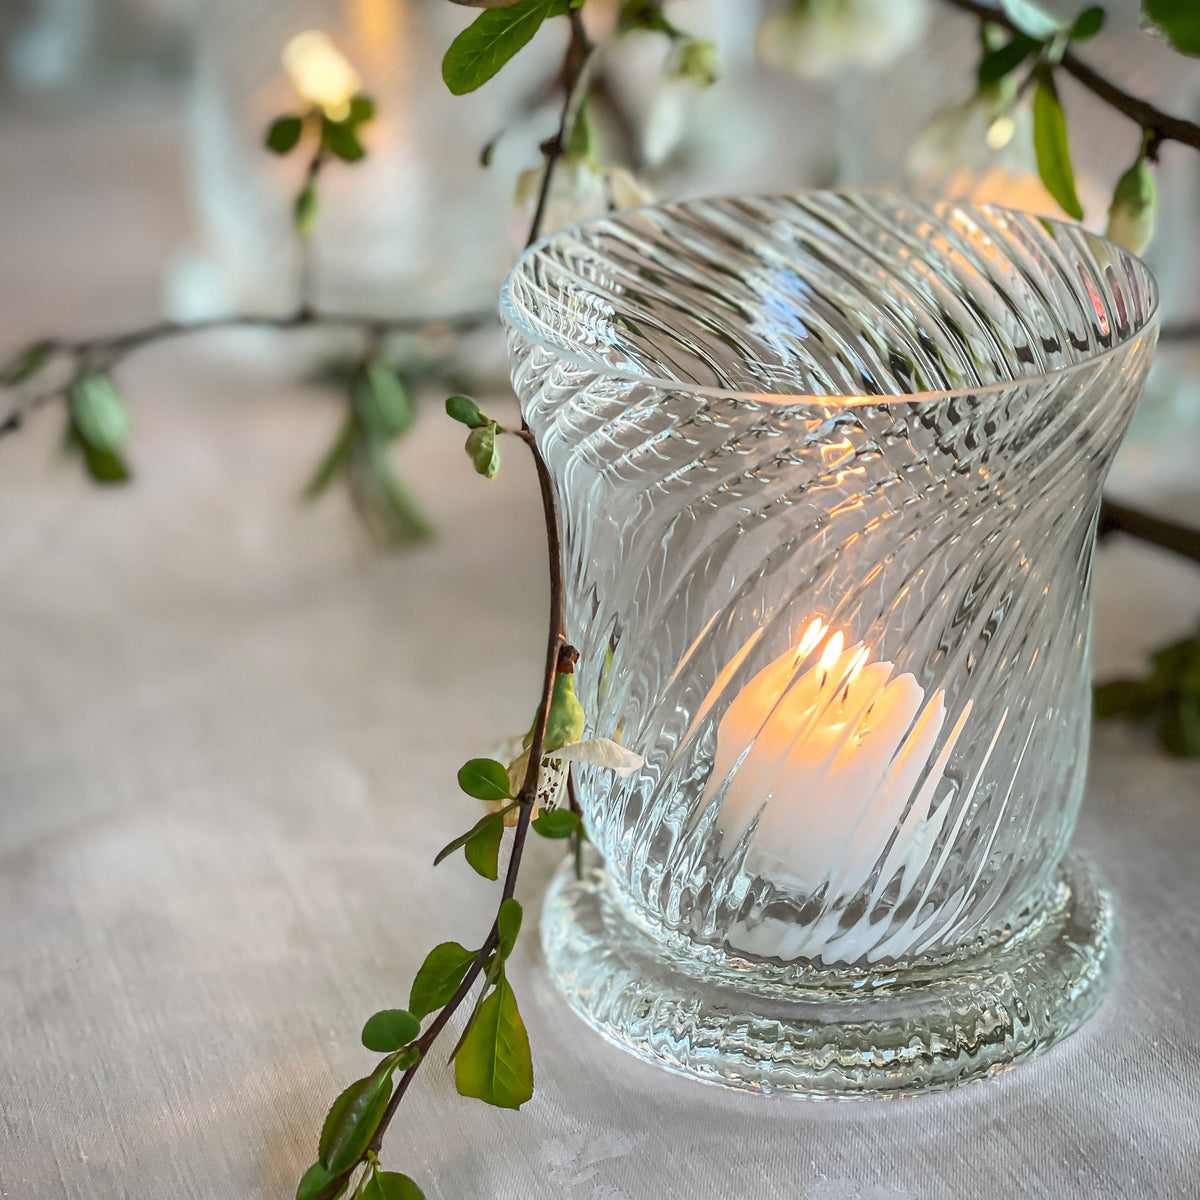 A Quinn Clear Votive by Caskata holds a lit candle and is surrounded by leafy green branches on a spring tabletop.